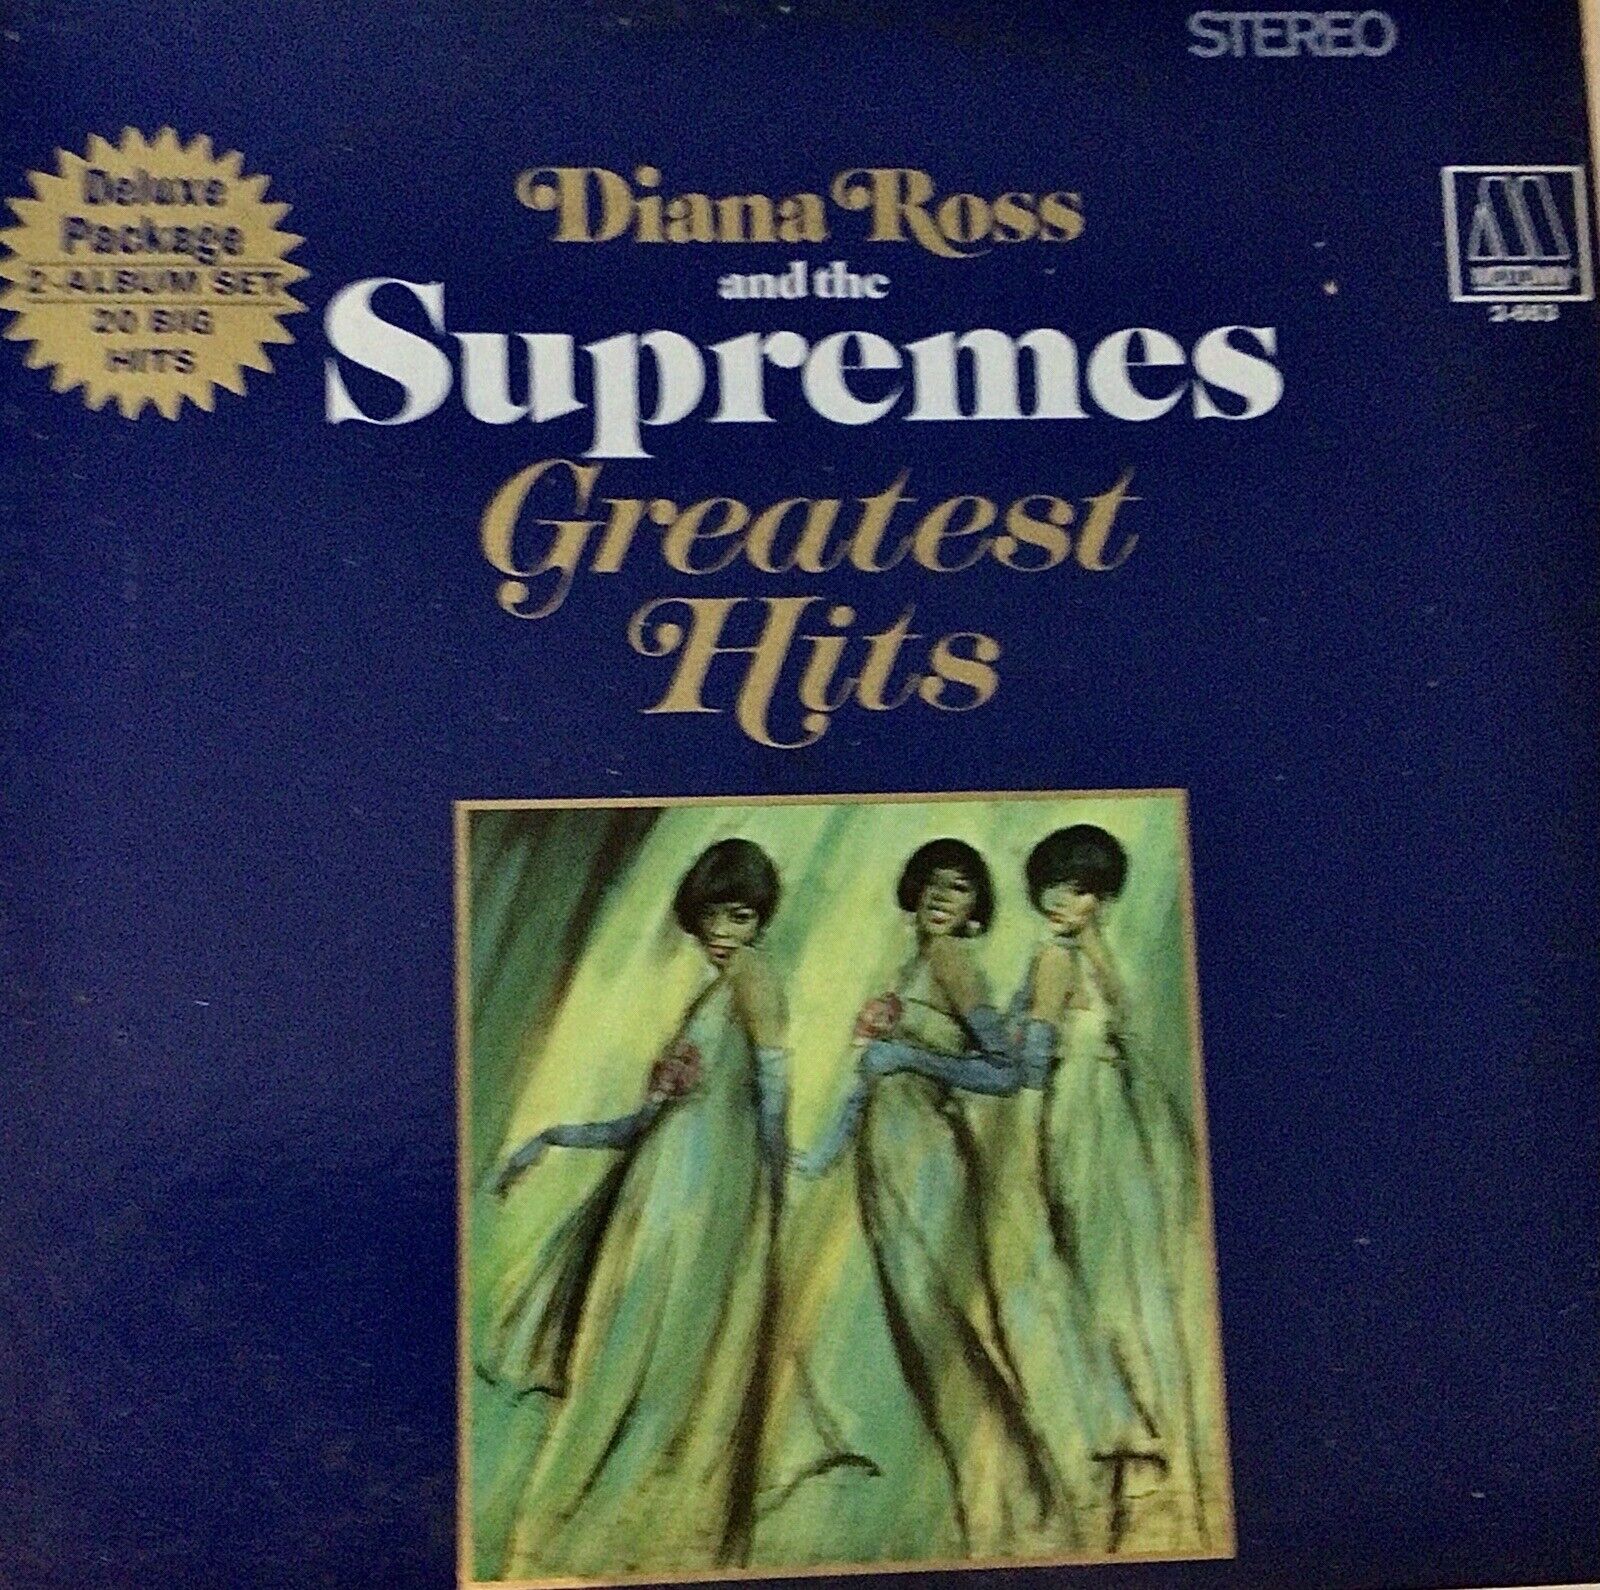 Diana Ross and the Supremes Greatest Hits, Deluxe Double LP Excellent Condition